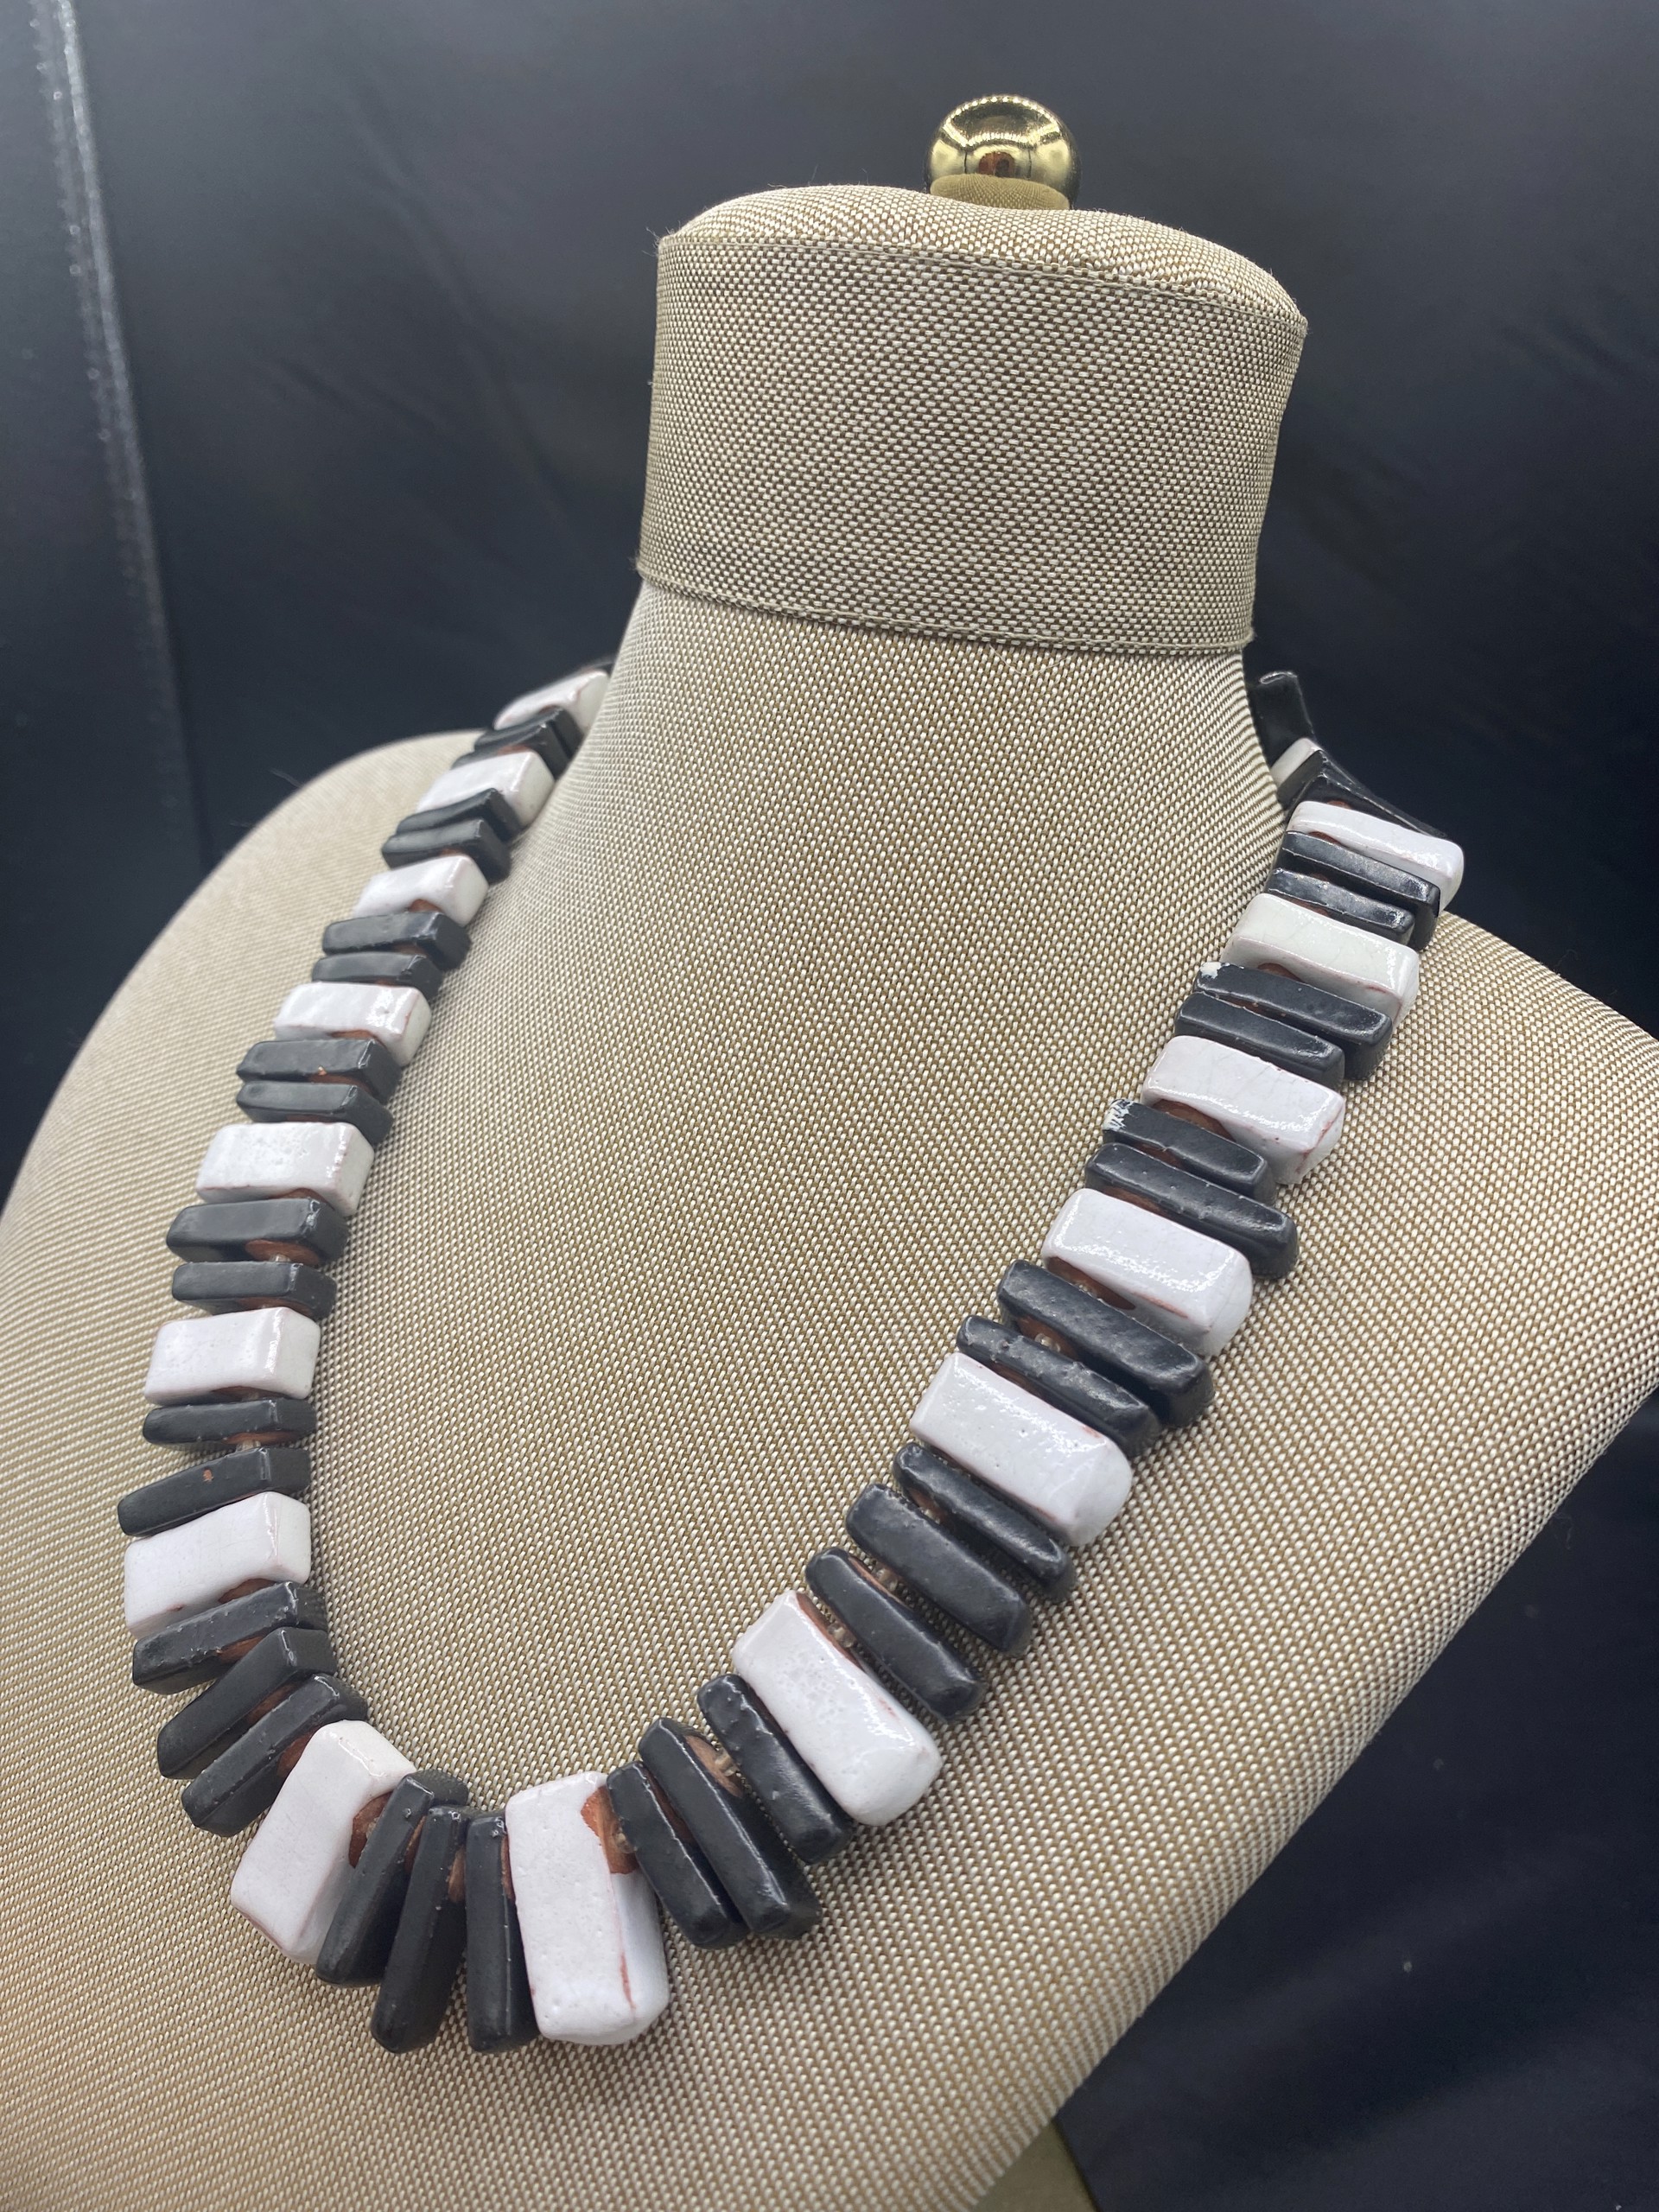 19" Black and White Bead Necklace by Stella Sullivan